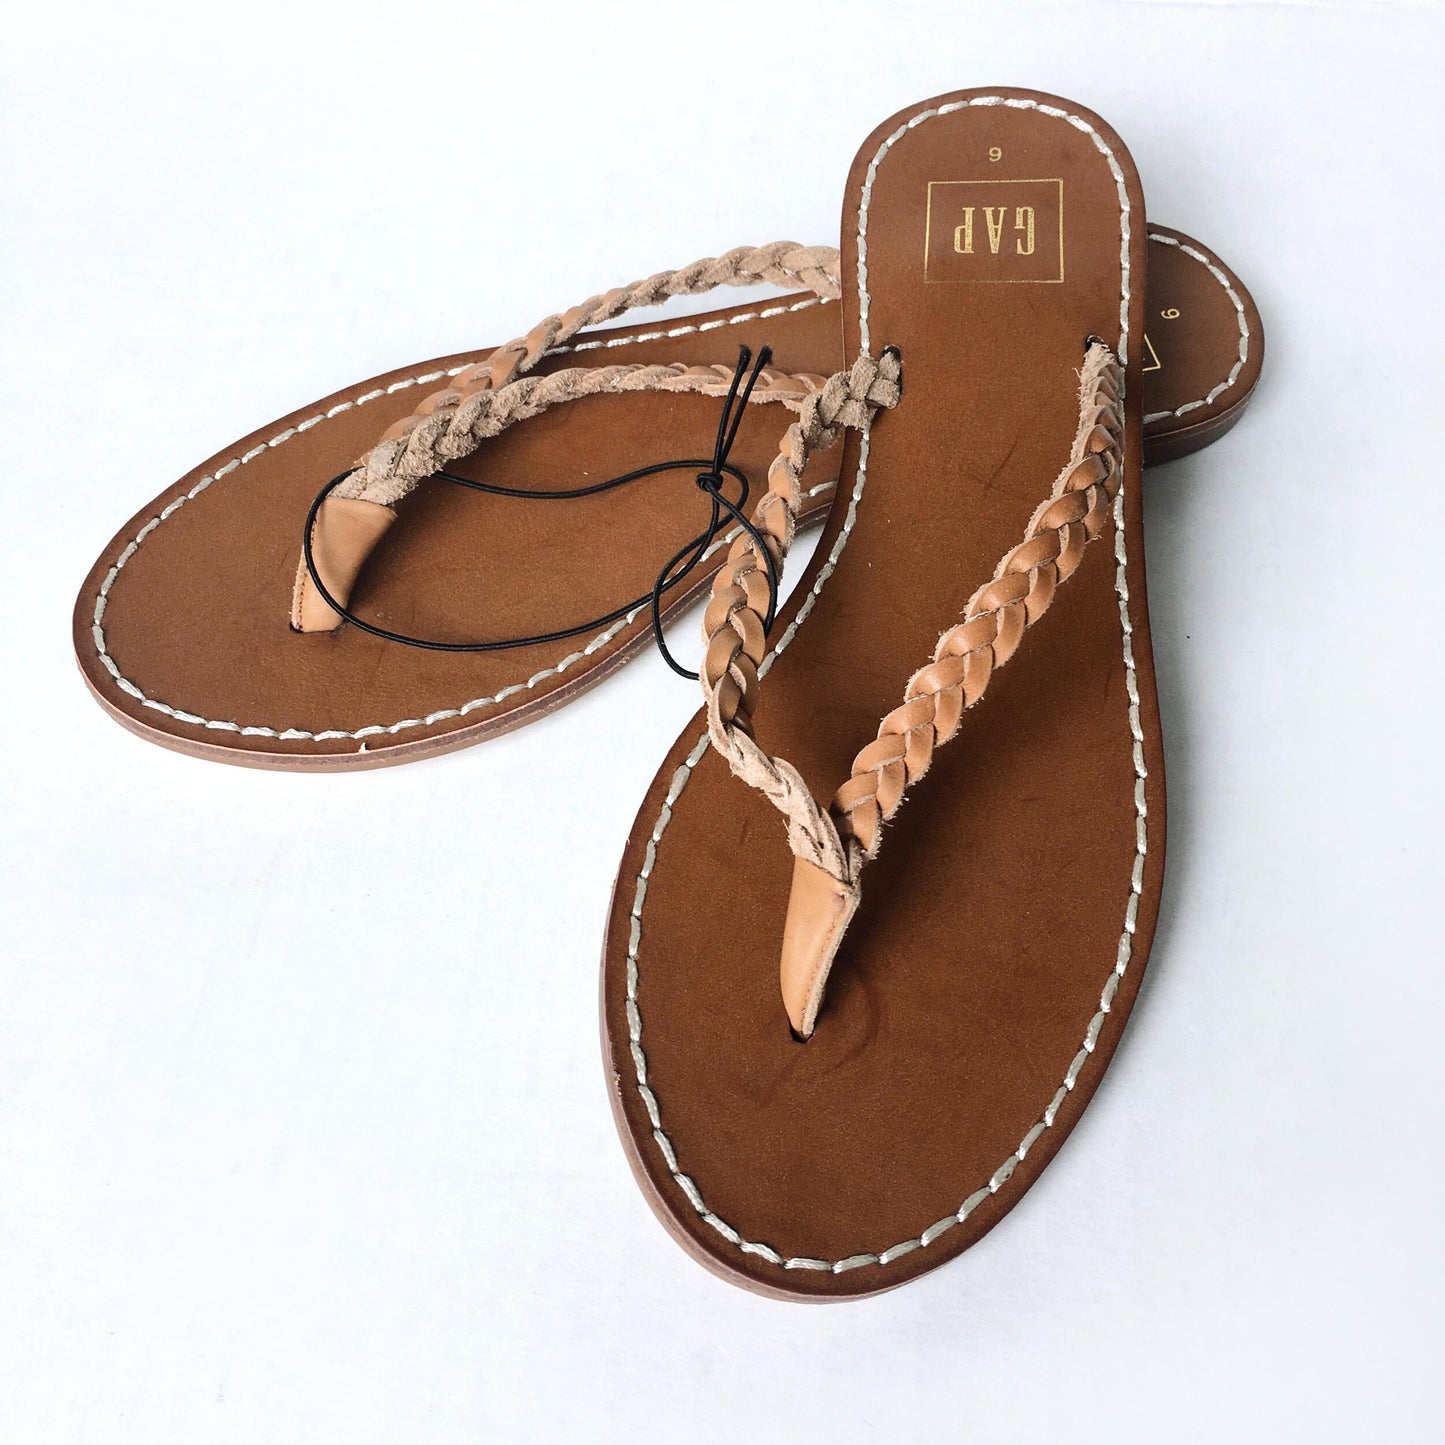 NWT GAP braided leather thong sandals - size 6